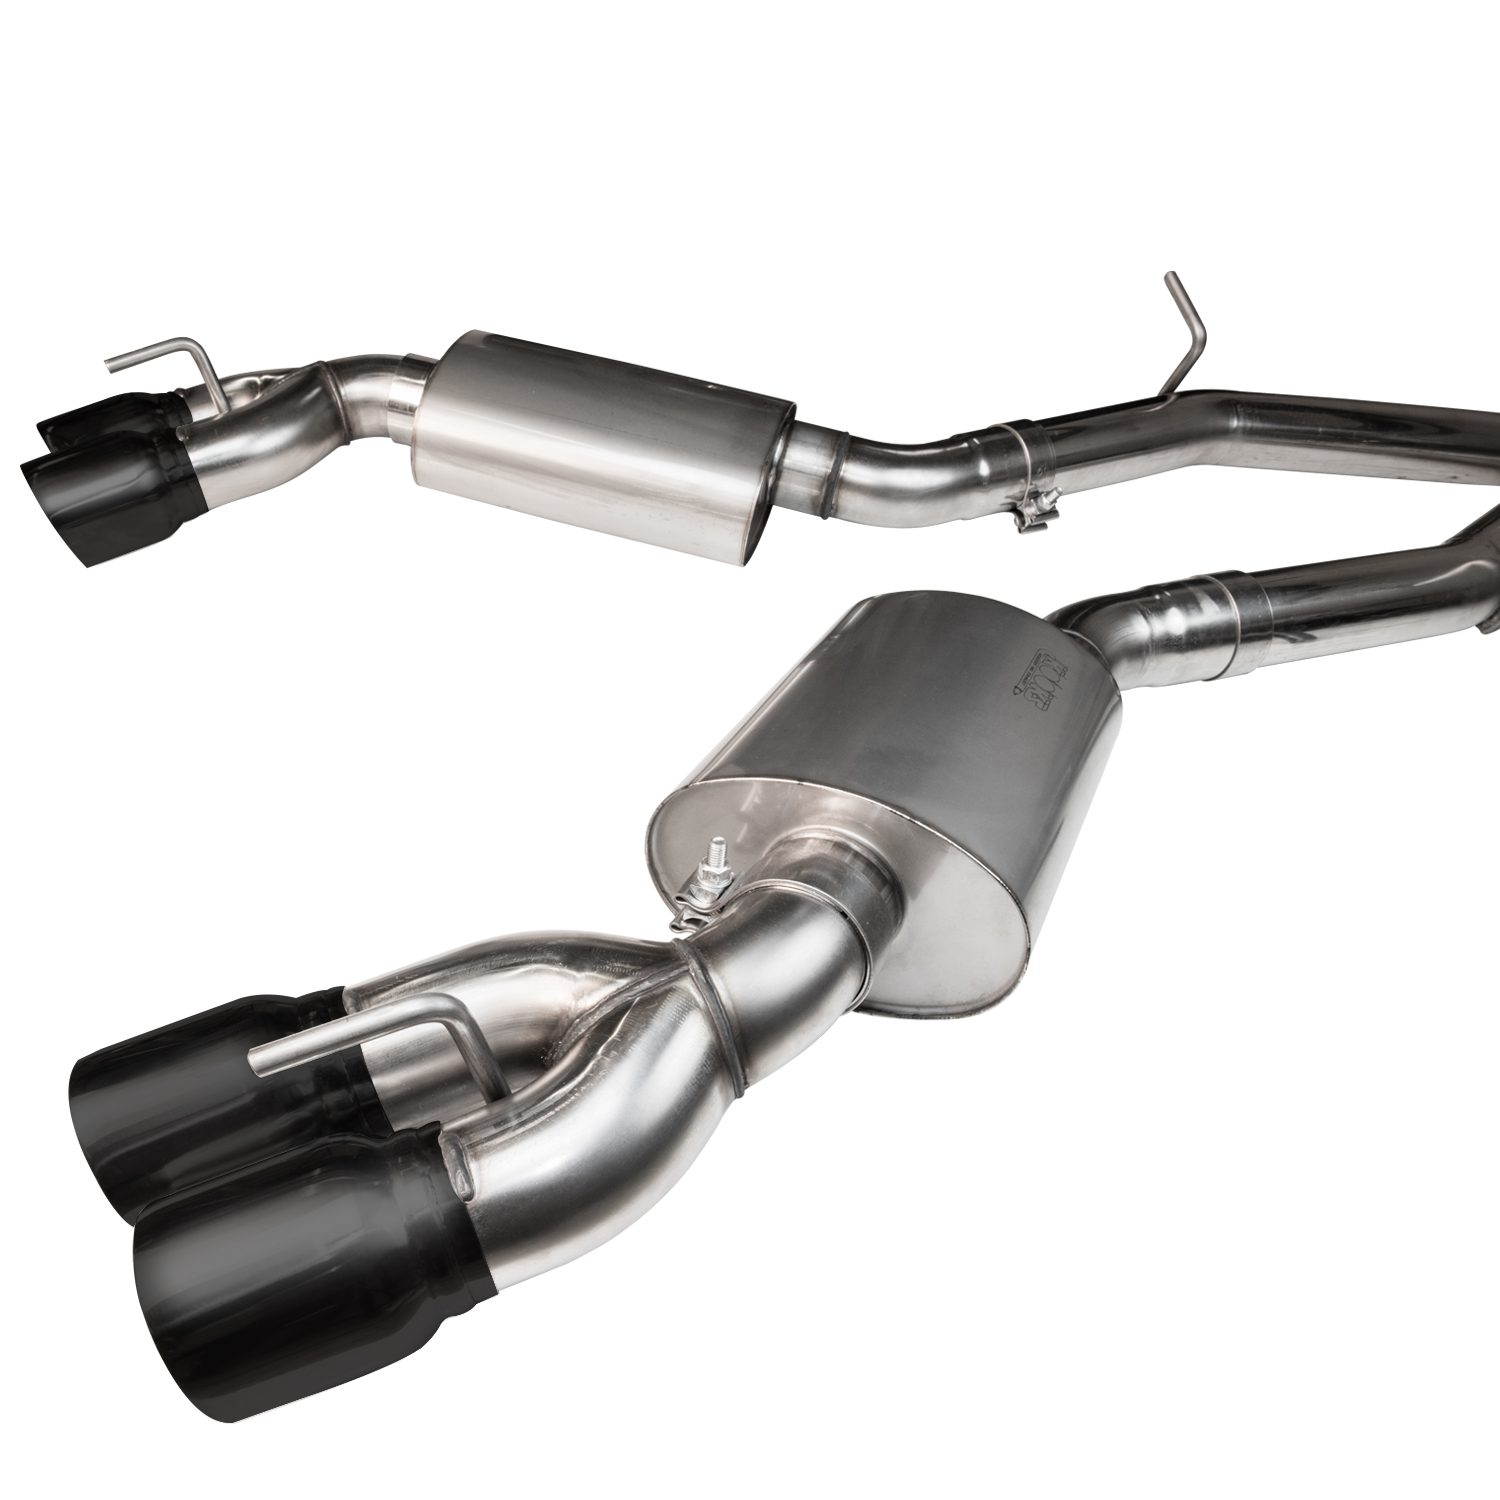 2016+ Chevrolet Camaro SS LT1 6.2L & 2017+ Chevrolet Camaro ZL1 LT4 6.2L Complete 3 inch Non-Catted Exhaust System w/X-Pipe, Ova